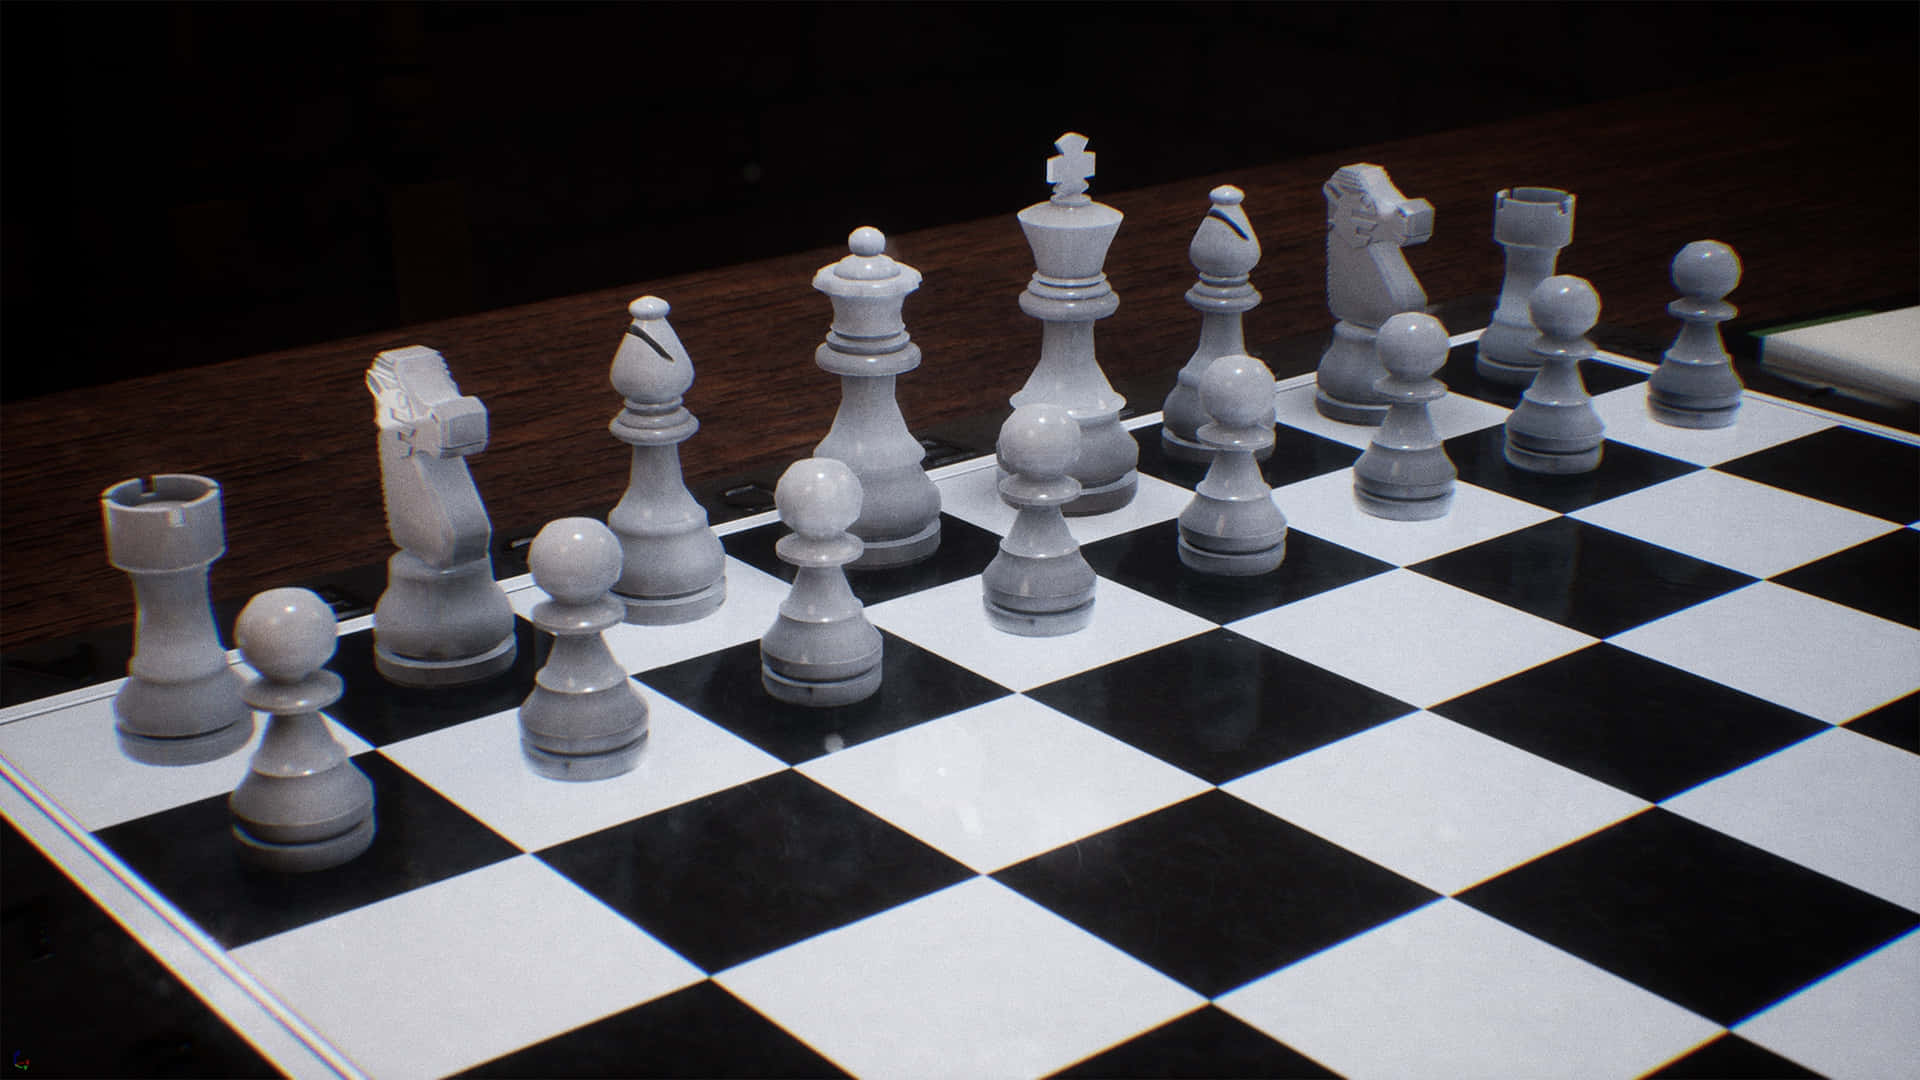 Strategize your move and become the ultimate Chess grandmaster. Wallpaper